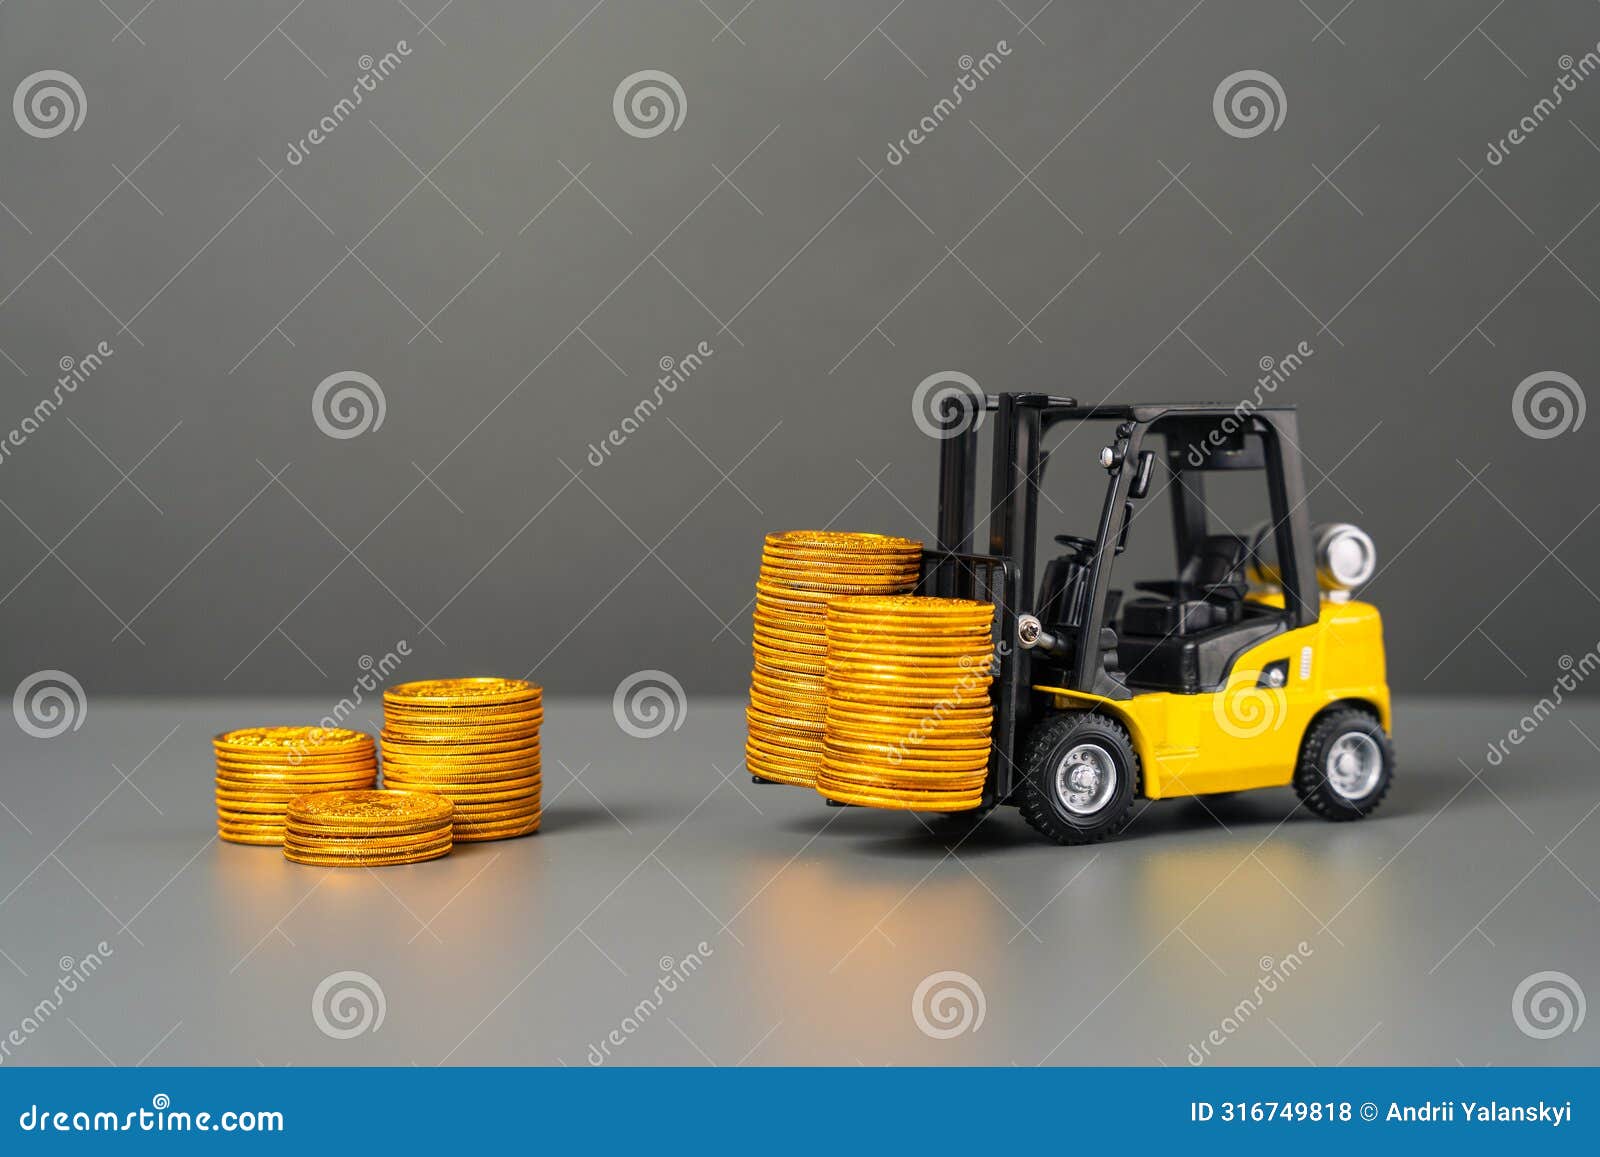 a forklift brings cash coins. attracting investments.